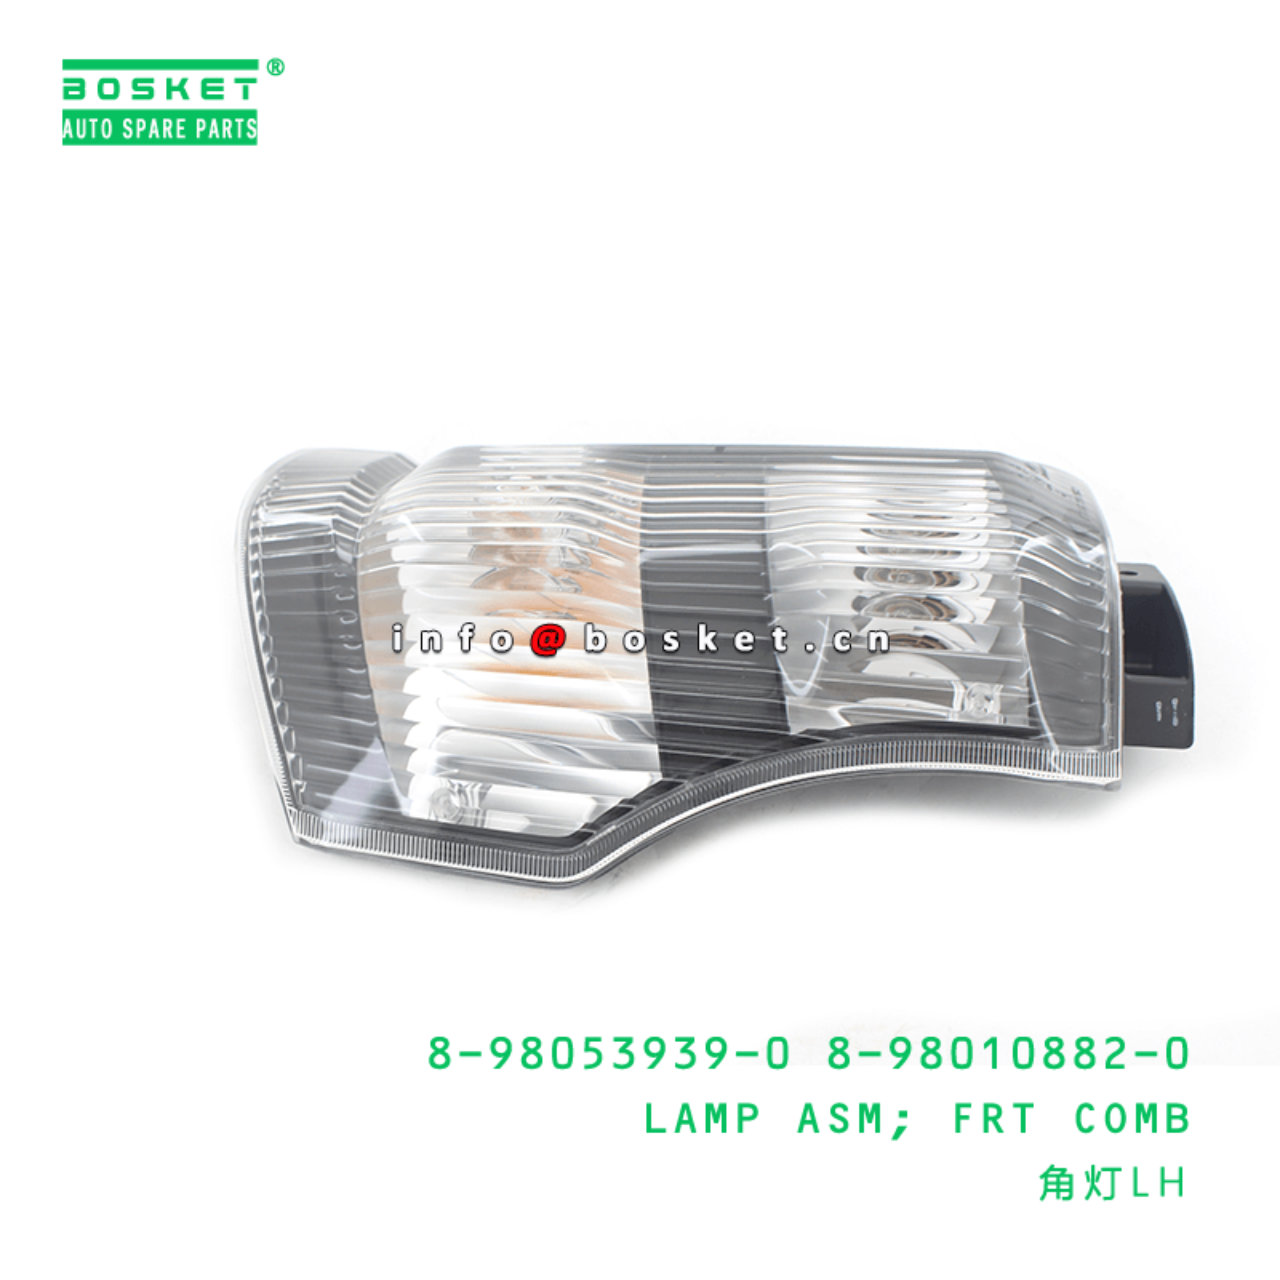 8-98053939-0 8-98010882-0 Front Combination Lamp Assembly 8980539390 8980108820 Suitable for ISUZU 6